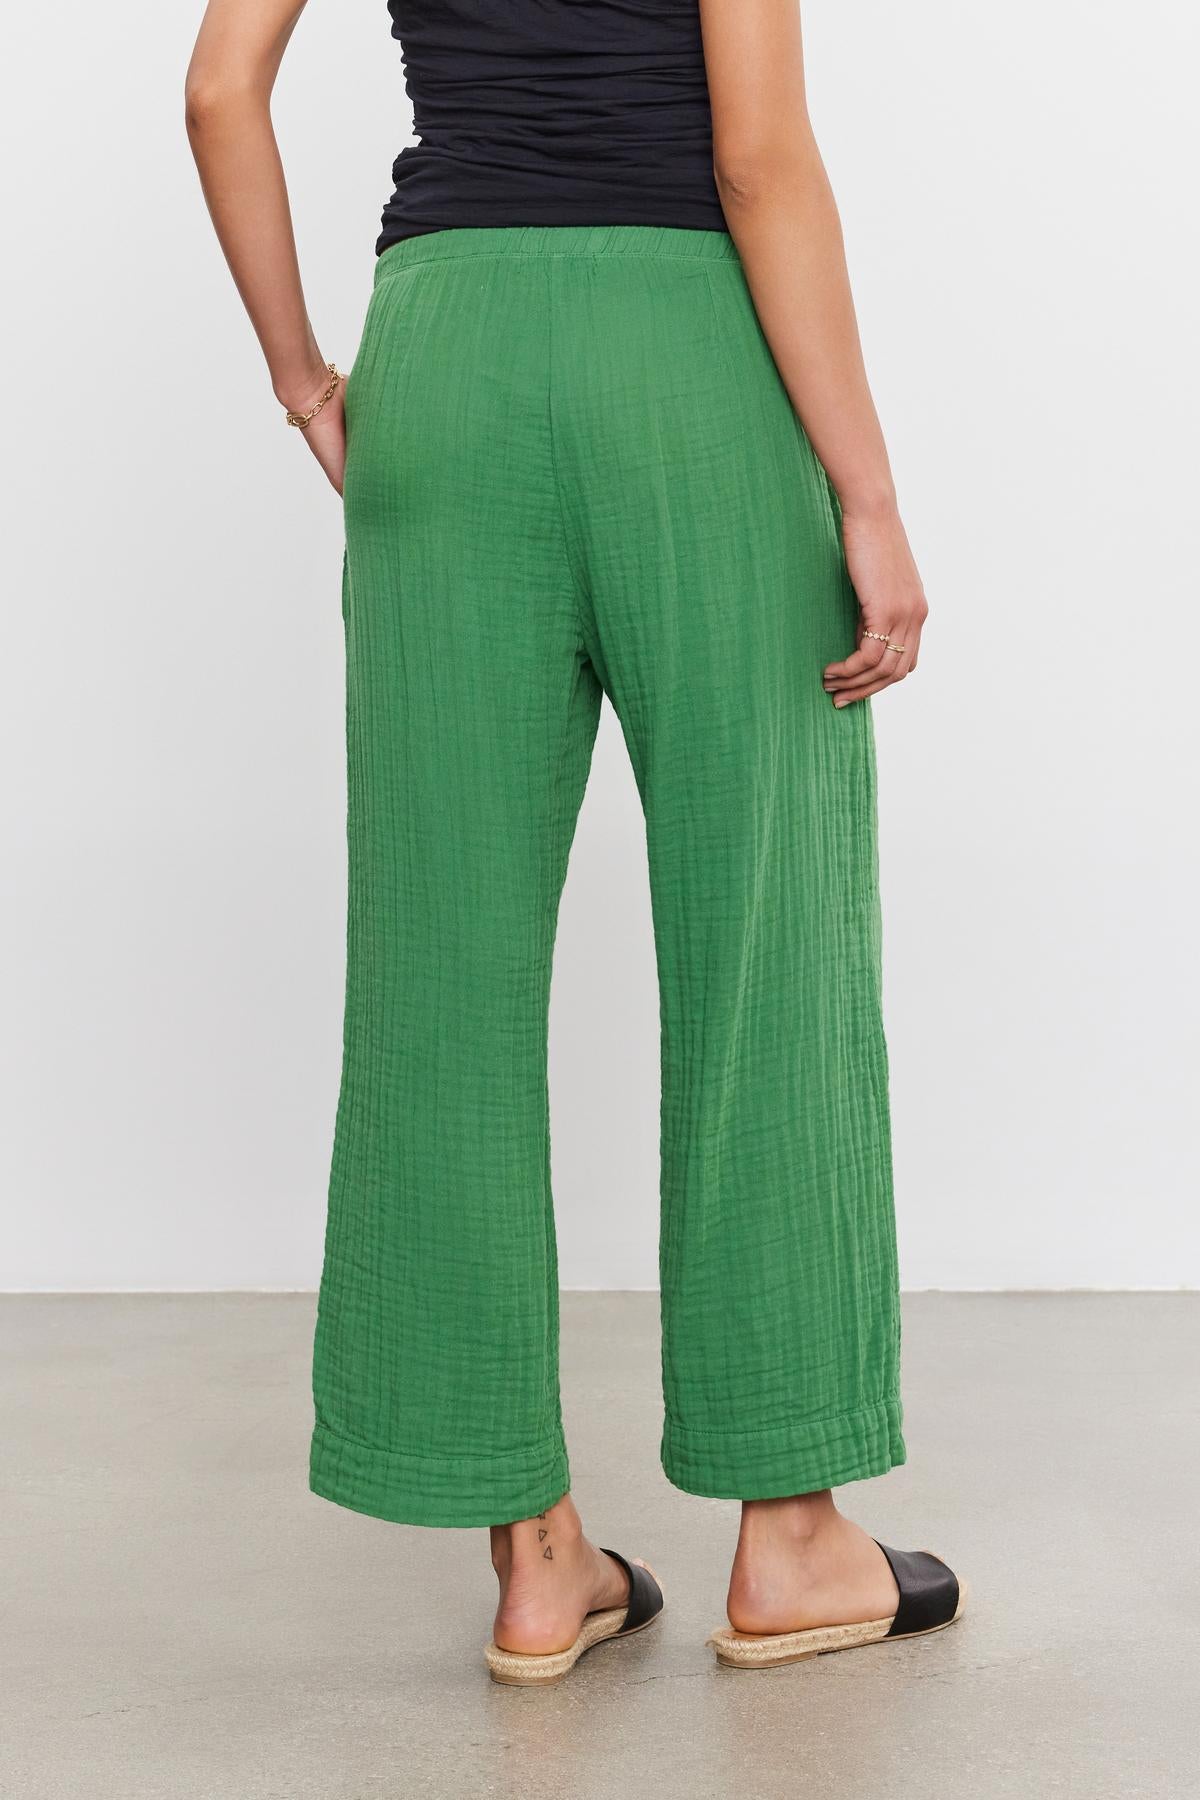 A person standing with their back to the camera, wearing green FRANNY COTTON GAUZE PANTS by Velvet by Graham & Spencer and black flat shoes.-36917078360257